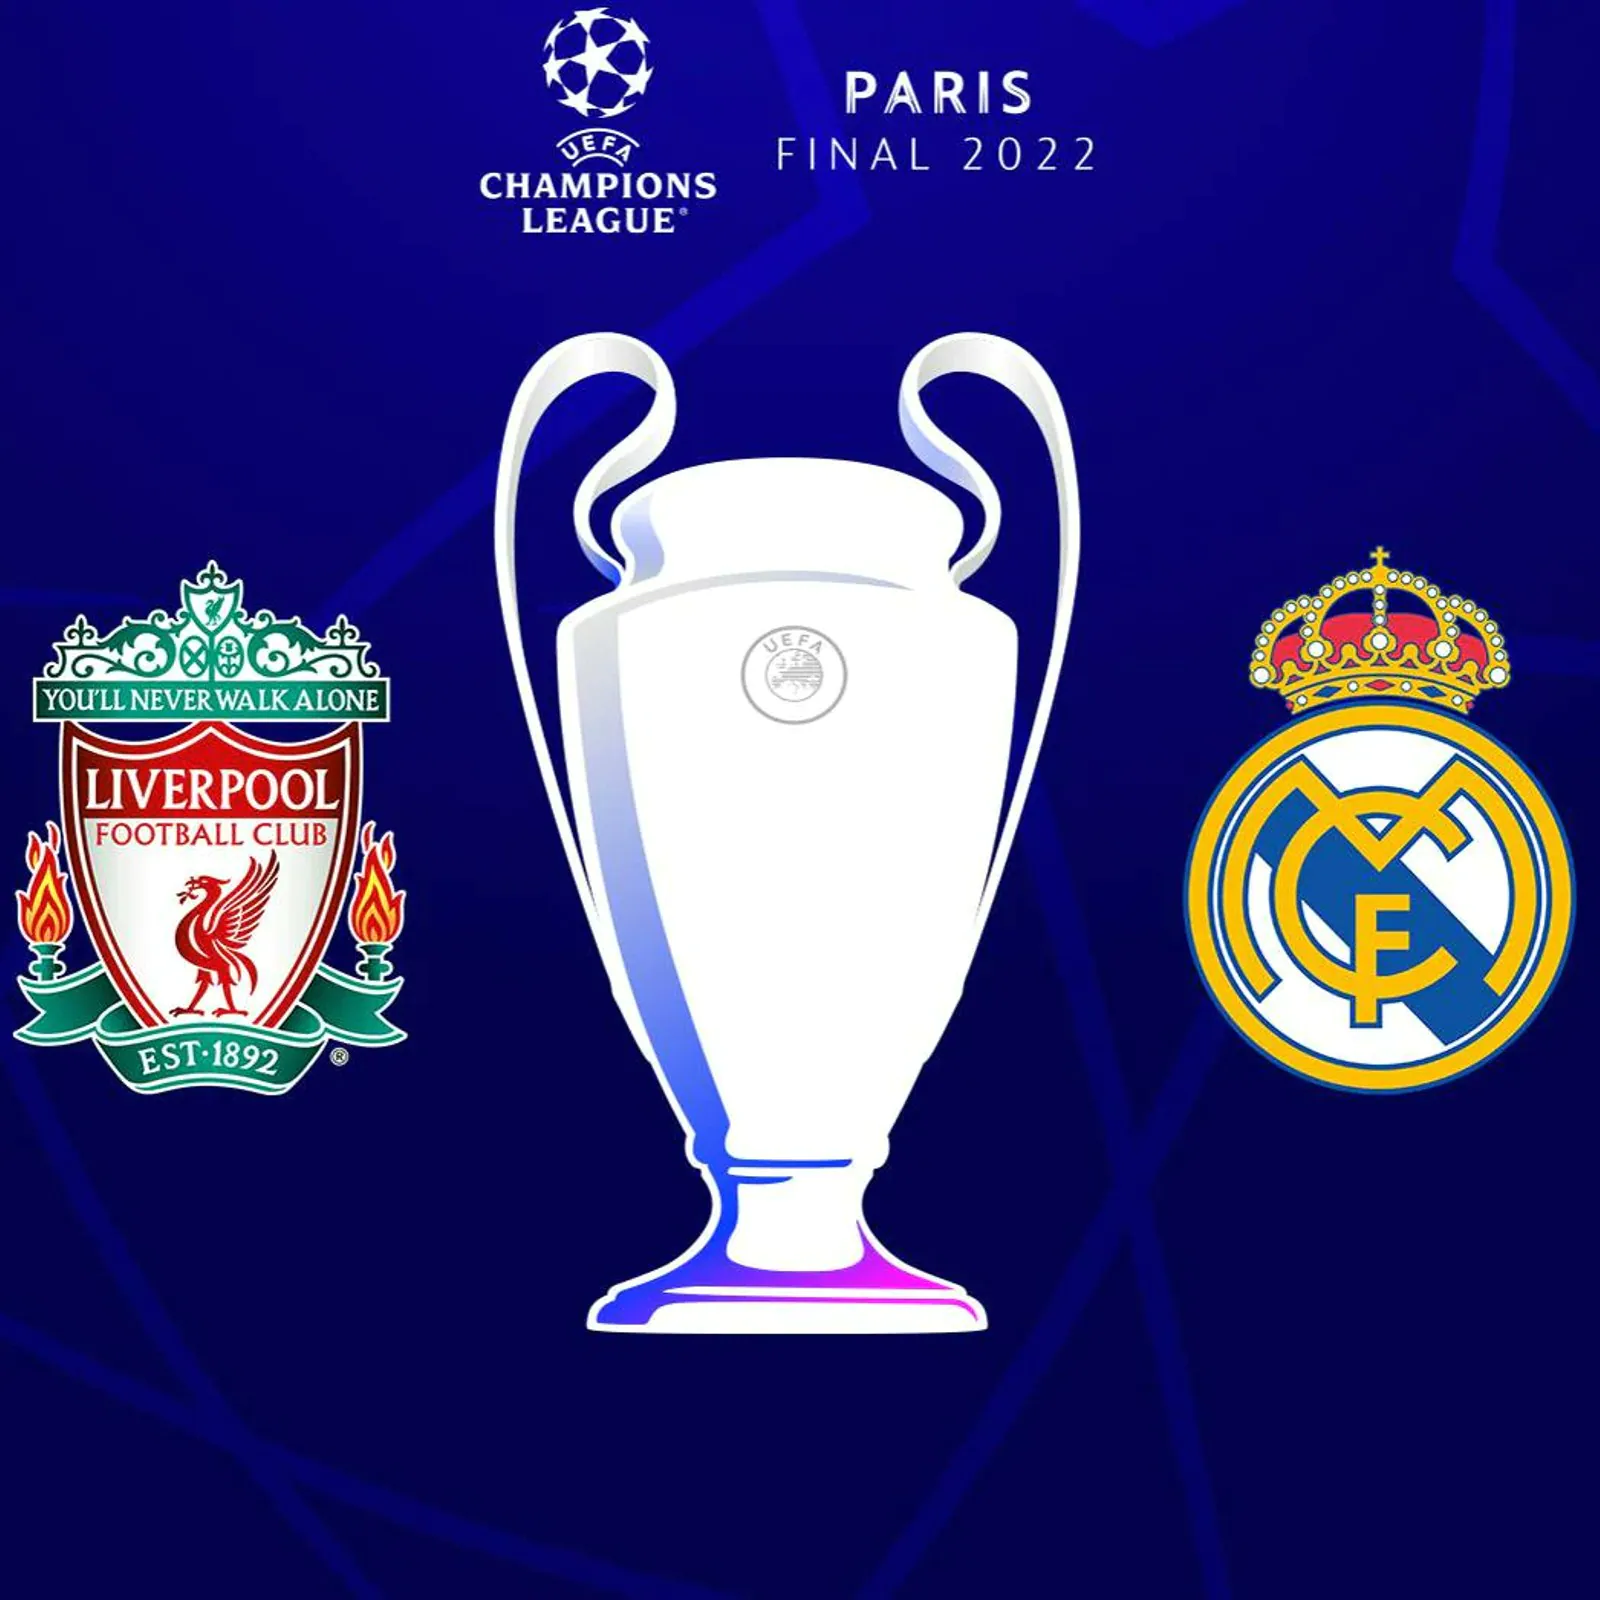 Liverpool vs Real Madrid, LIV vs RM Live in the Champions League, Match Preview, Squad News, Predicted Line Ups, Dream 11 Prediction, follow for Live Updates